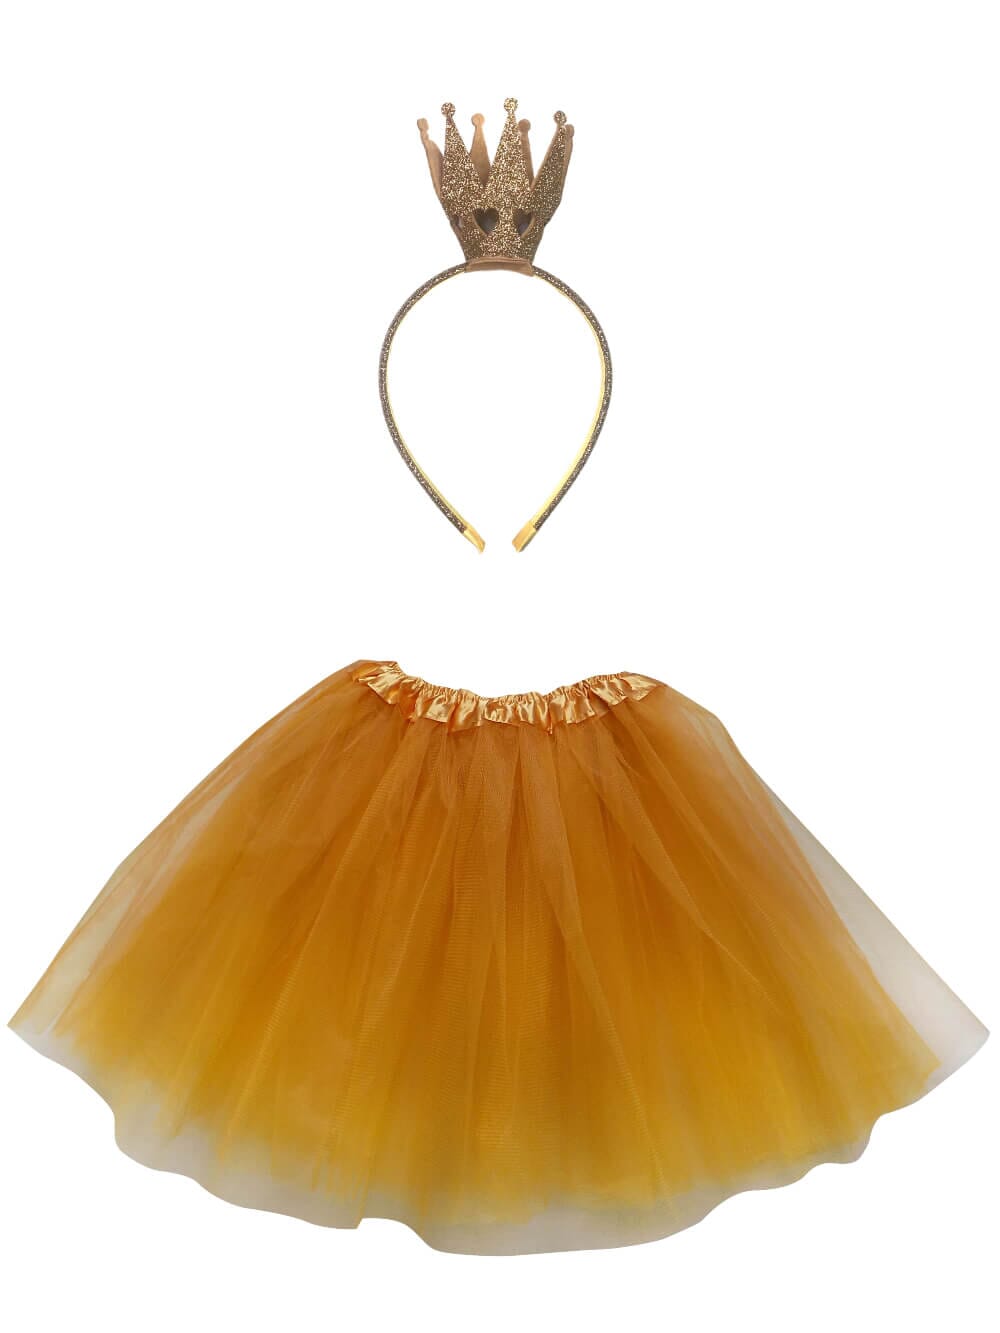 Adult Gold Crown Princess Costume - Gold Tutu Skirt & Headband Crown Set for Adult or Plus Size - Sydney So Sweet